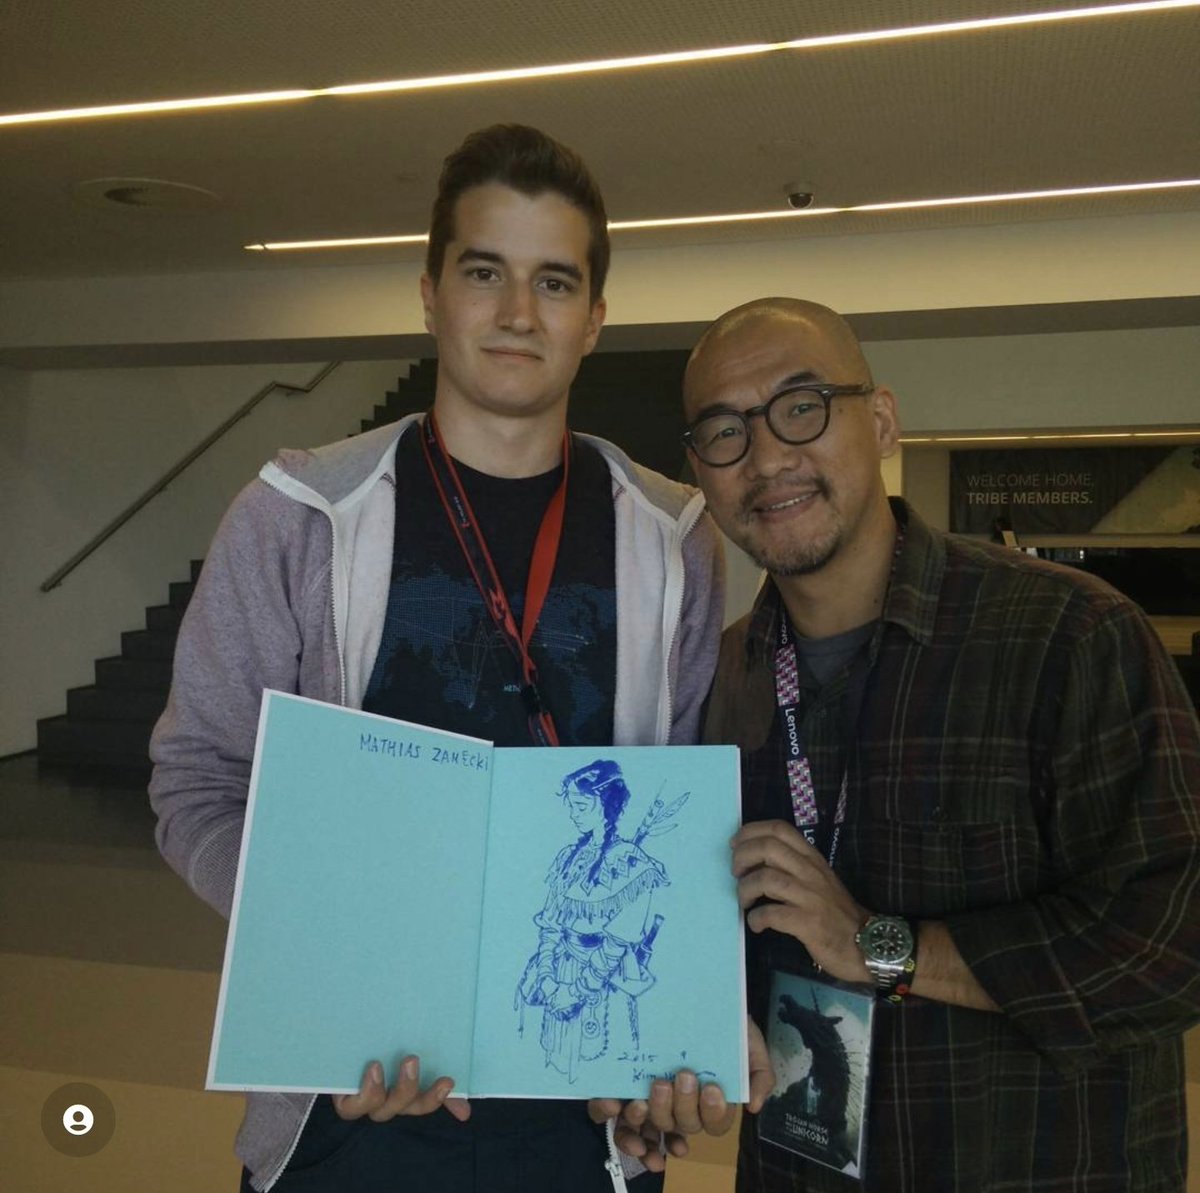 I met Kim back in 2015 and I was lucky enough to get few words with him and get drawover my stuff. he was one of the biggest inspiration for me and huge force to get better at drawing and perspective. Huge lost for art community today 😔 